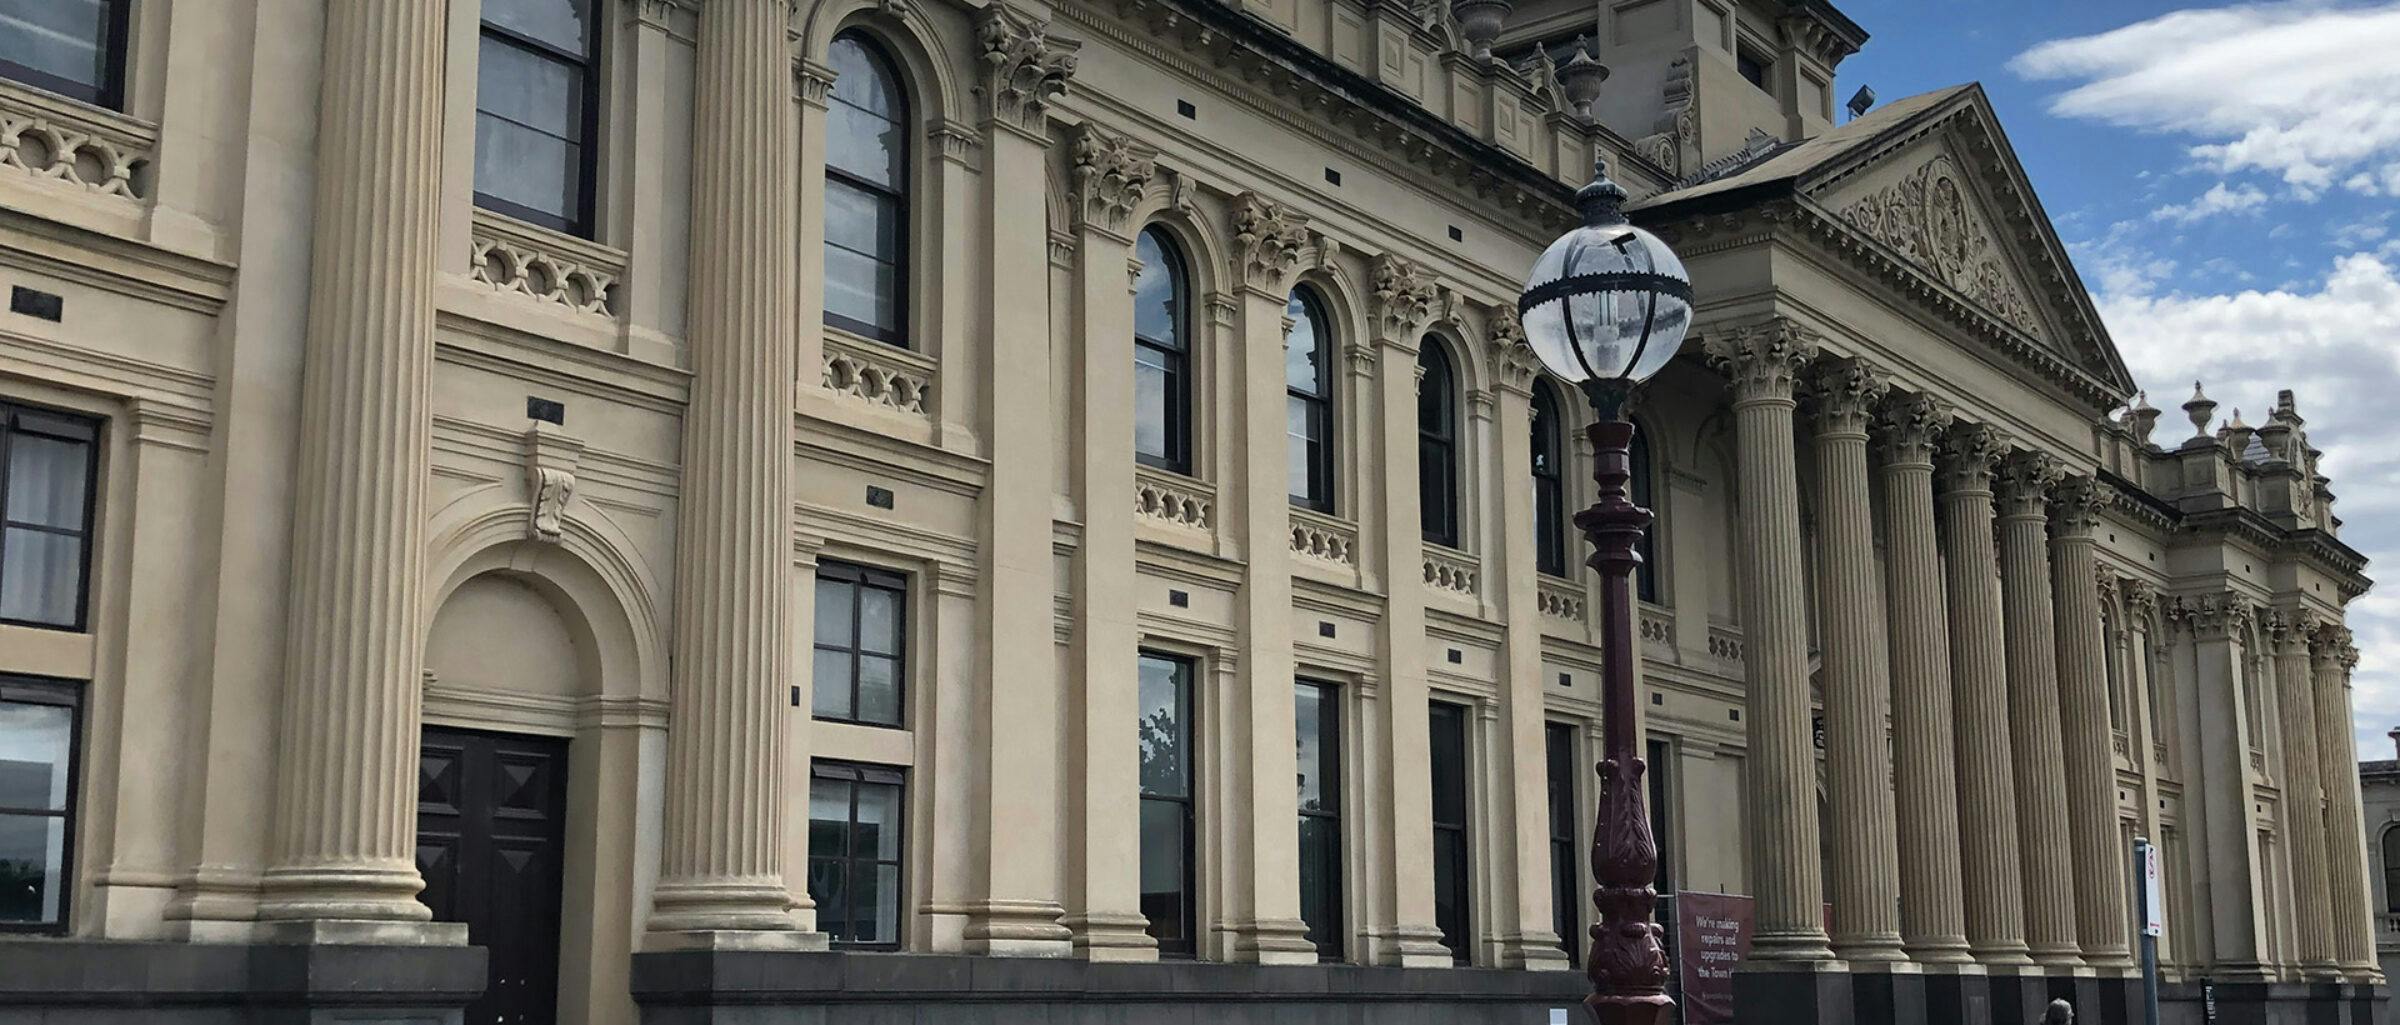 South Melbourne Townhall